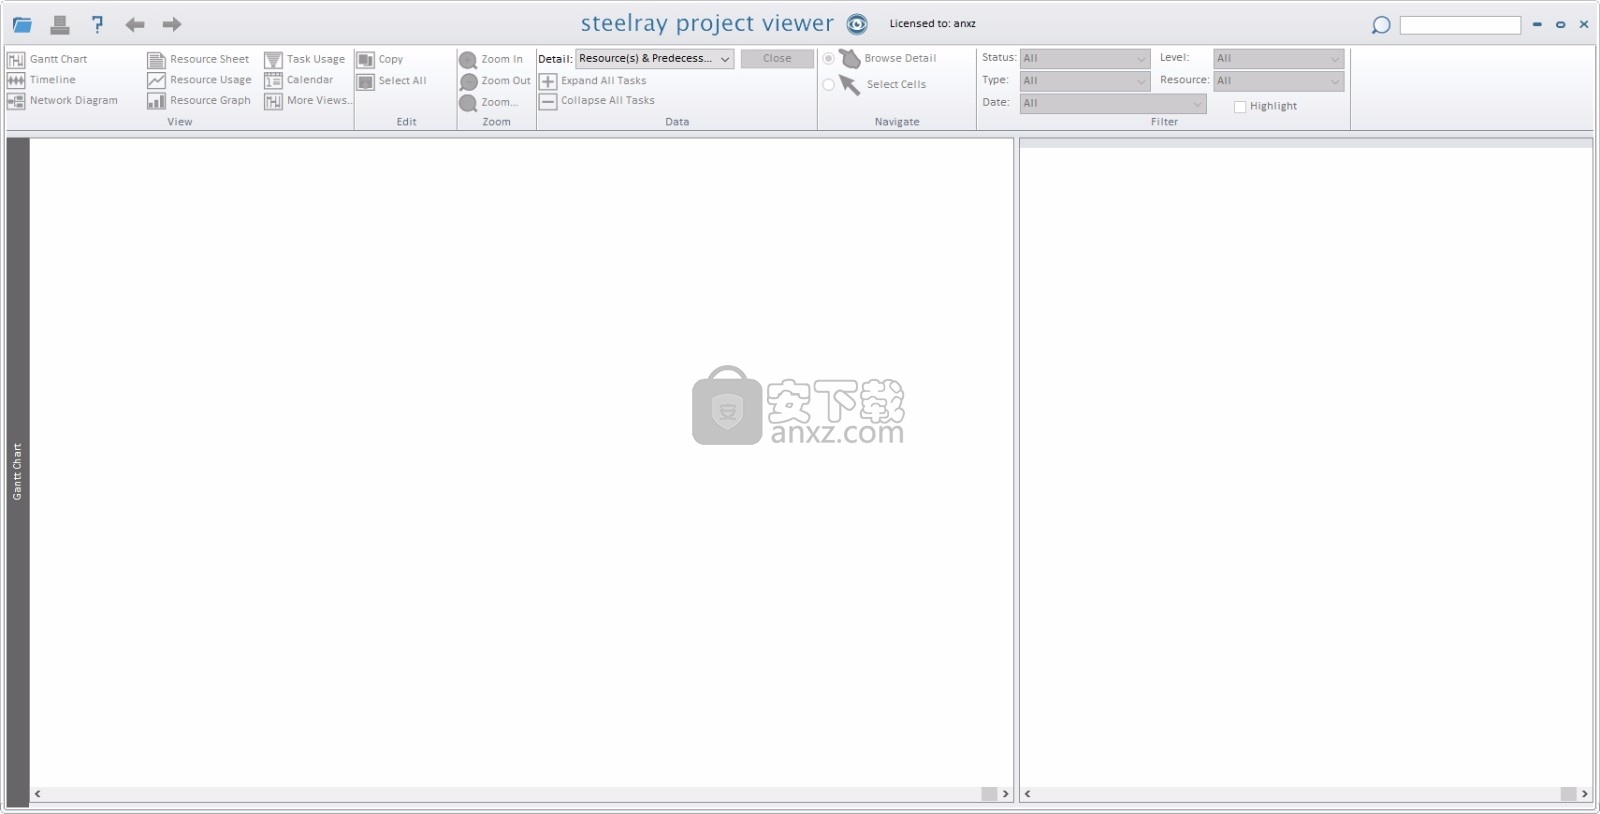 download the last version for mac Steelray Project Viewer 6.18